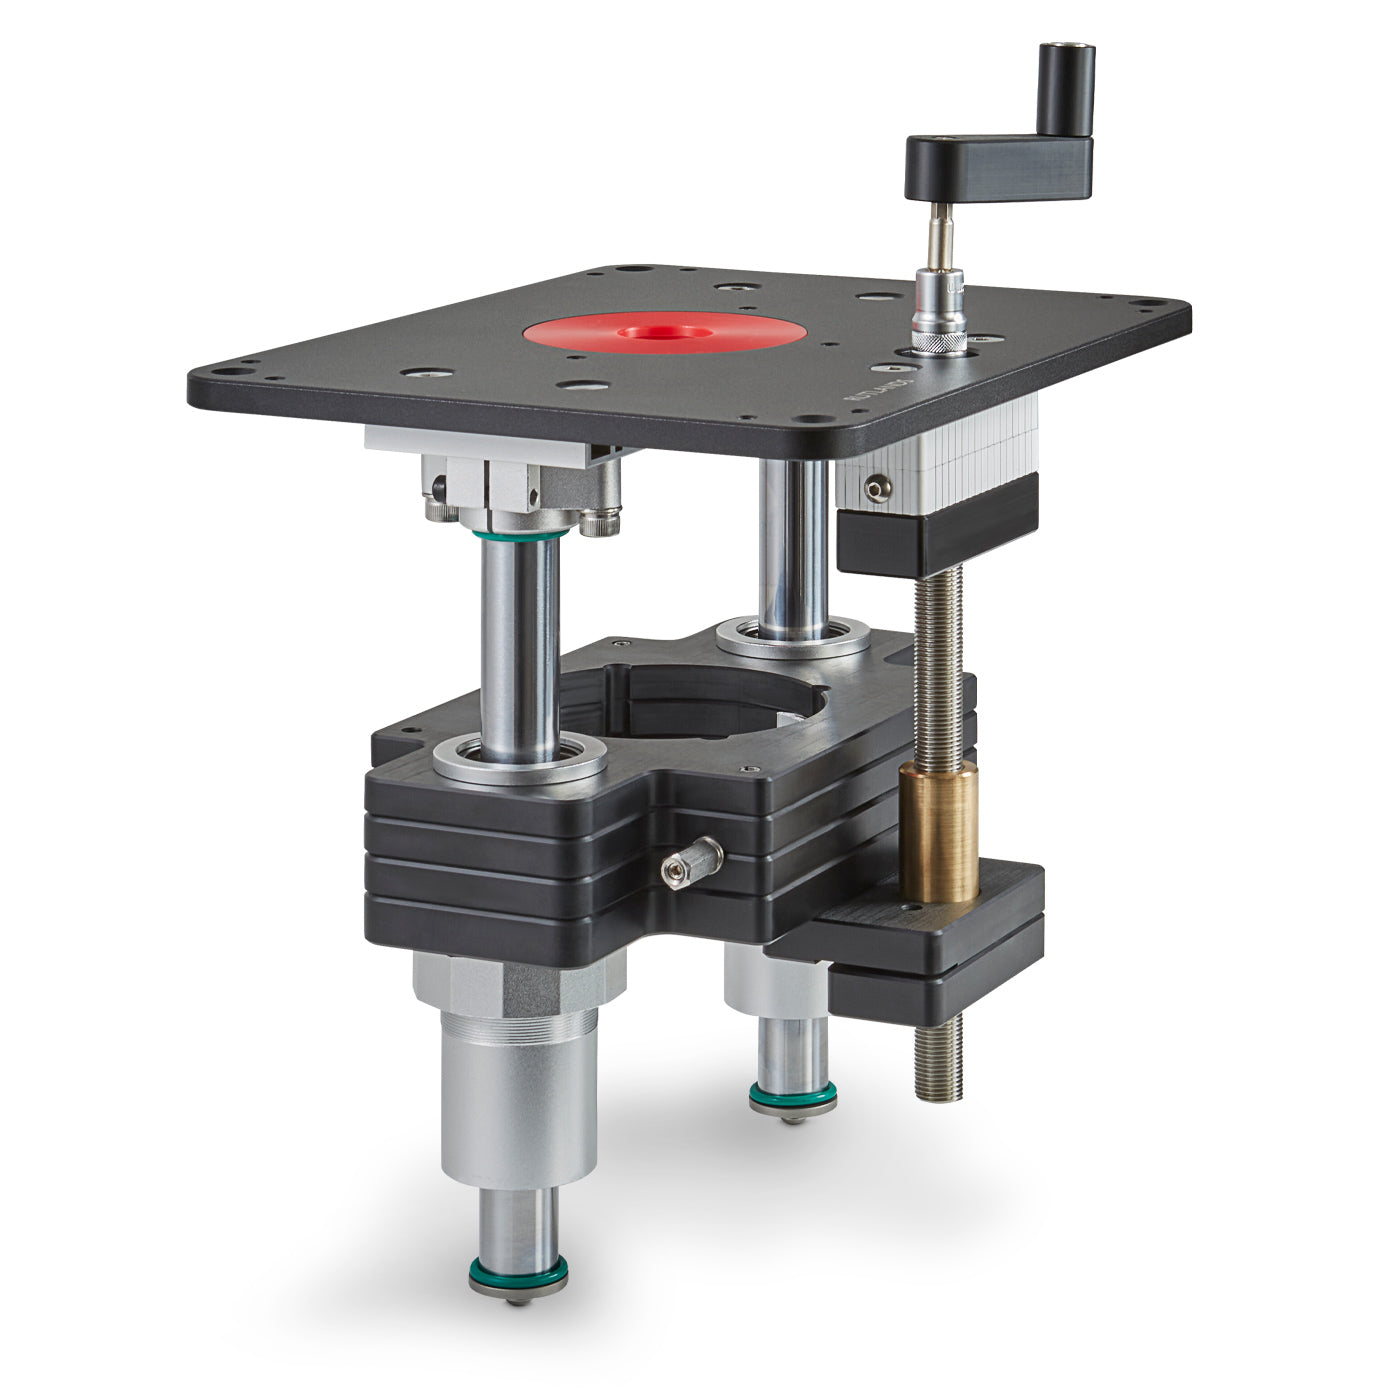 Cast Router Table - R15 Lift and Motor